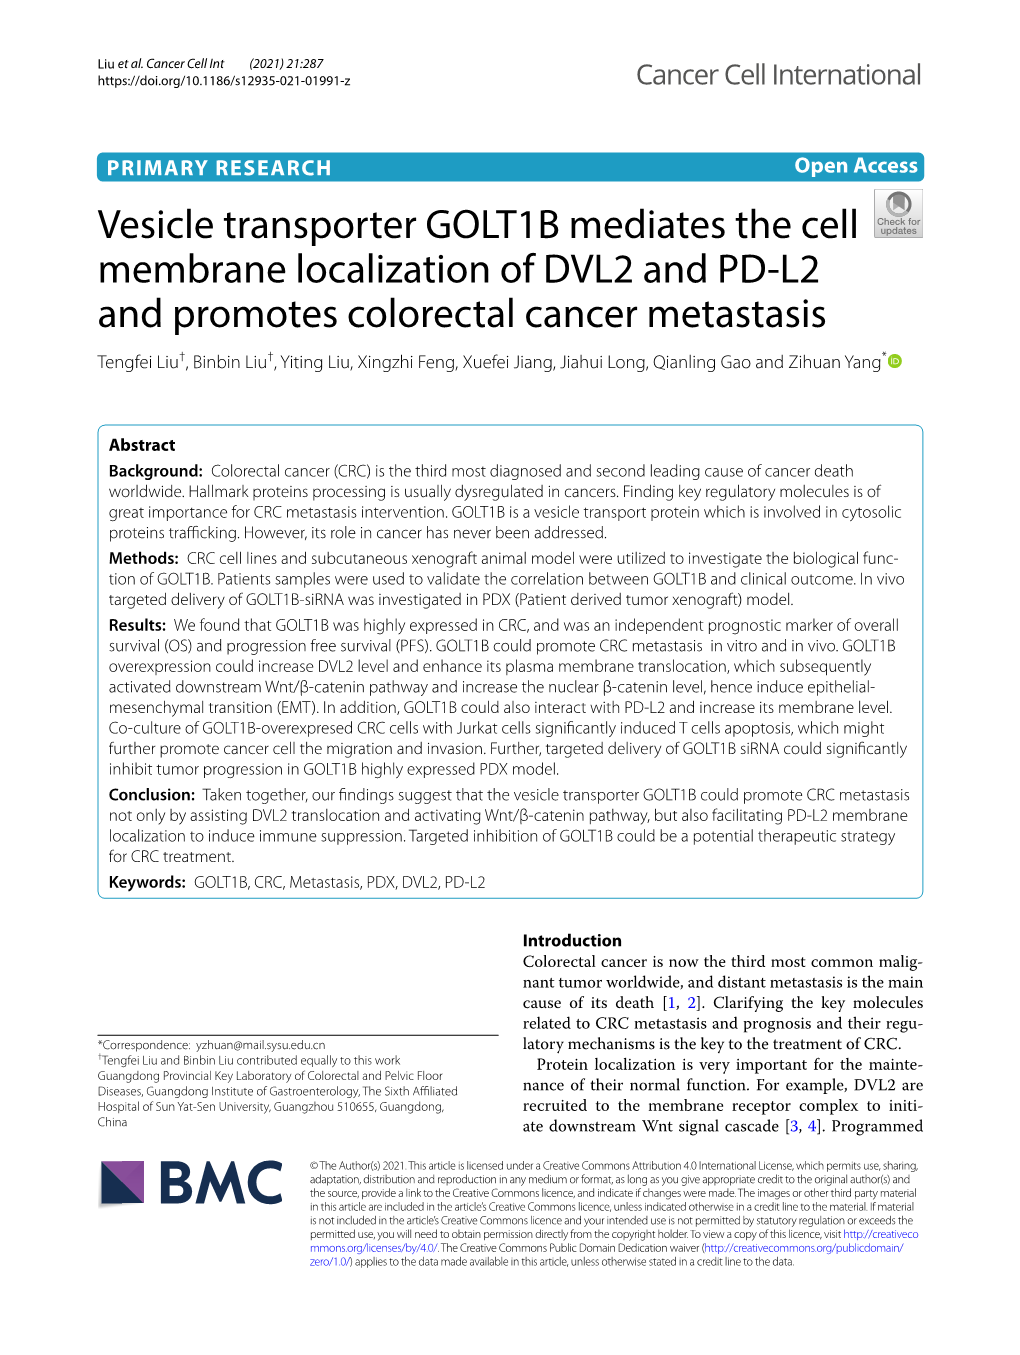 Vesicle Transporter GOLT1B Mediates the Cell Membrane Localization of DVL2 and PD-L2 and Promotes Colorectal Cancer Metastasis